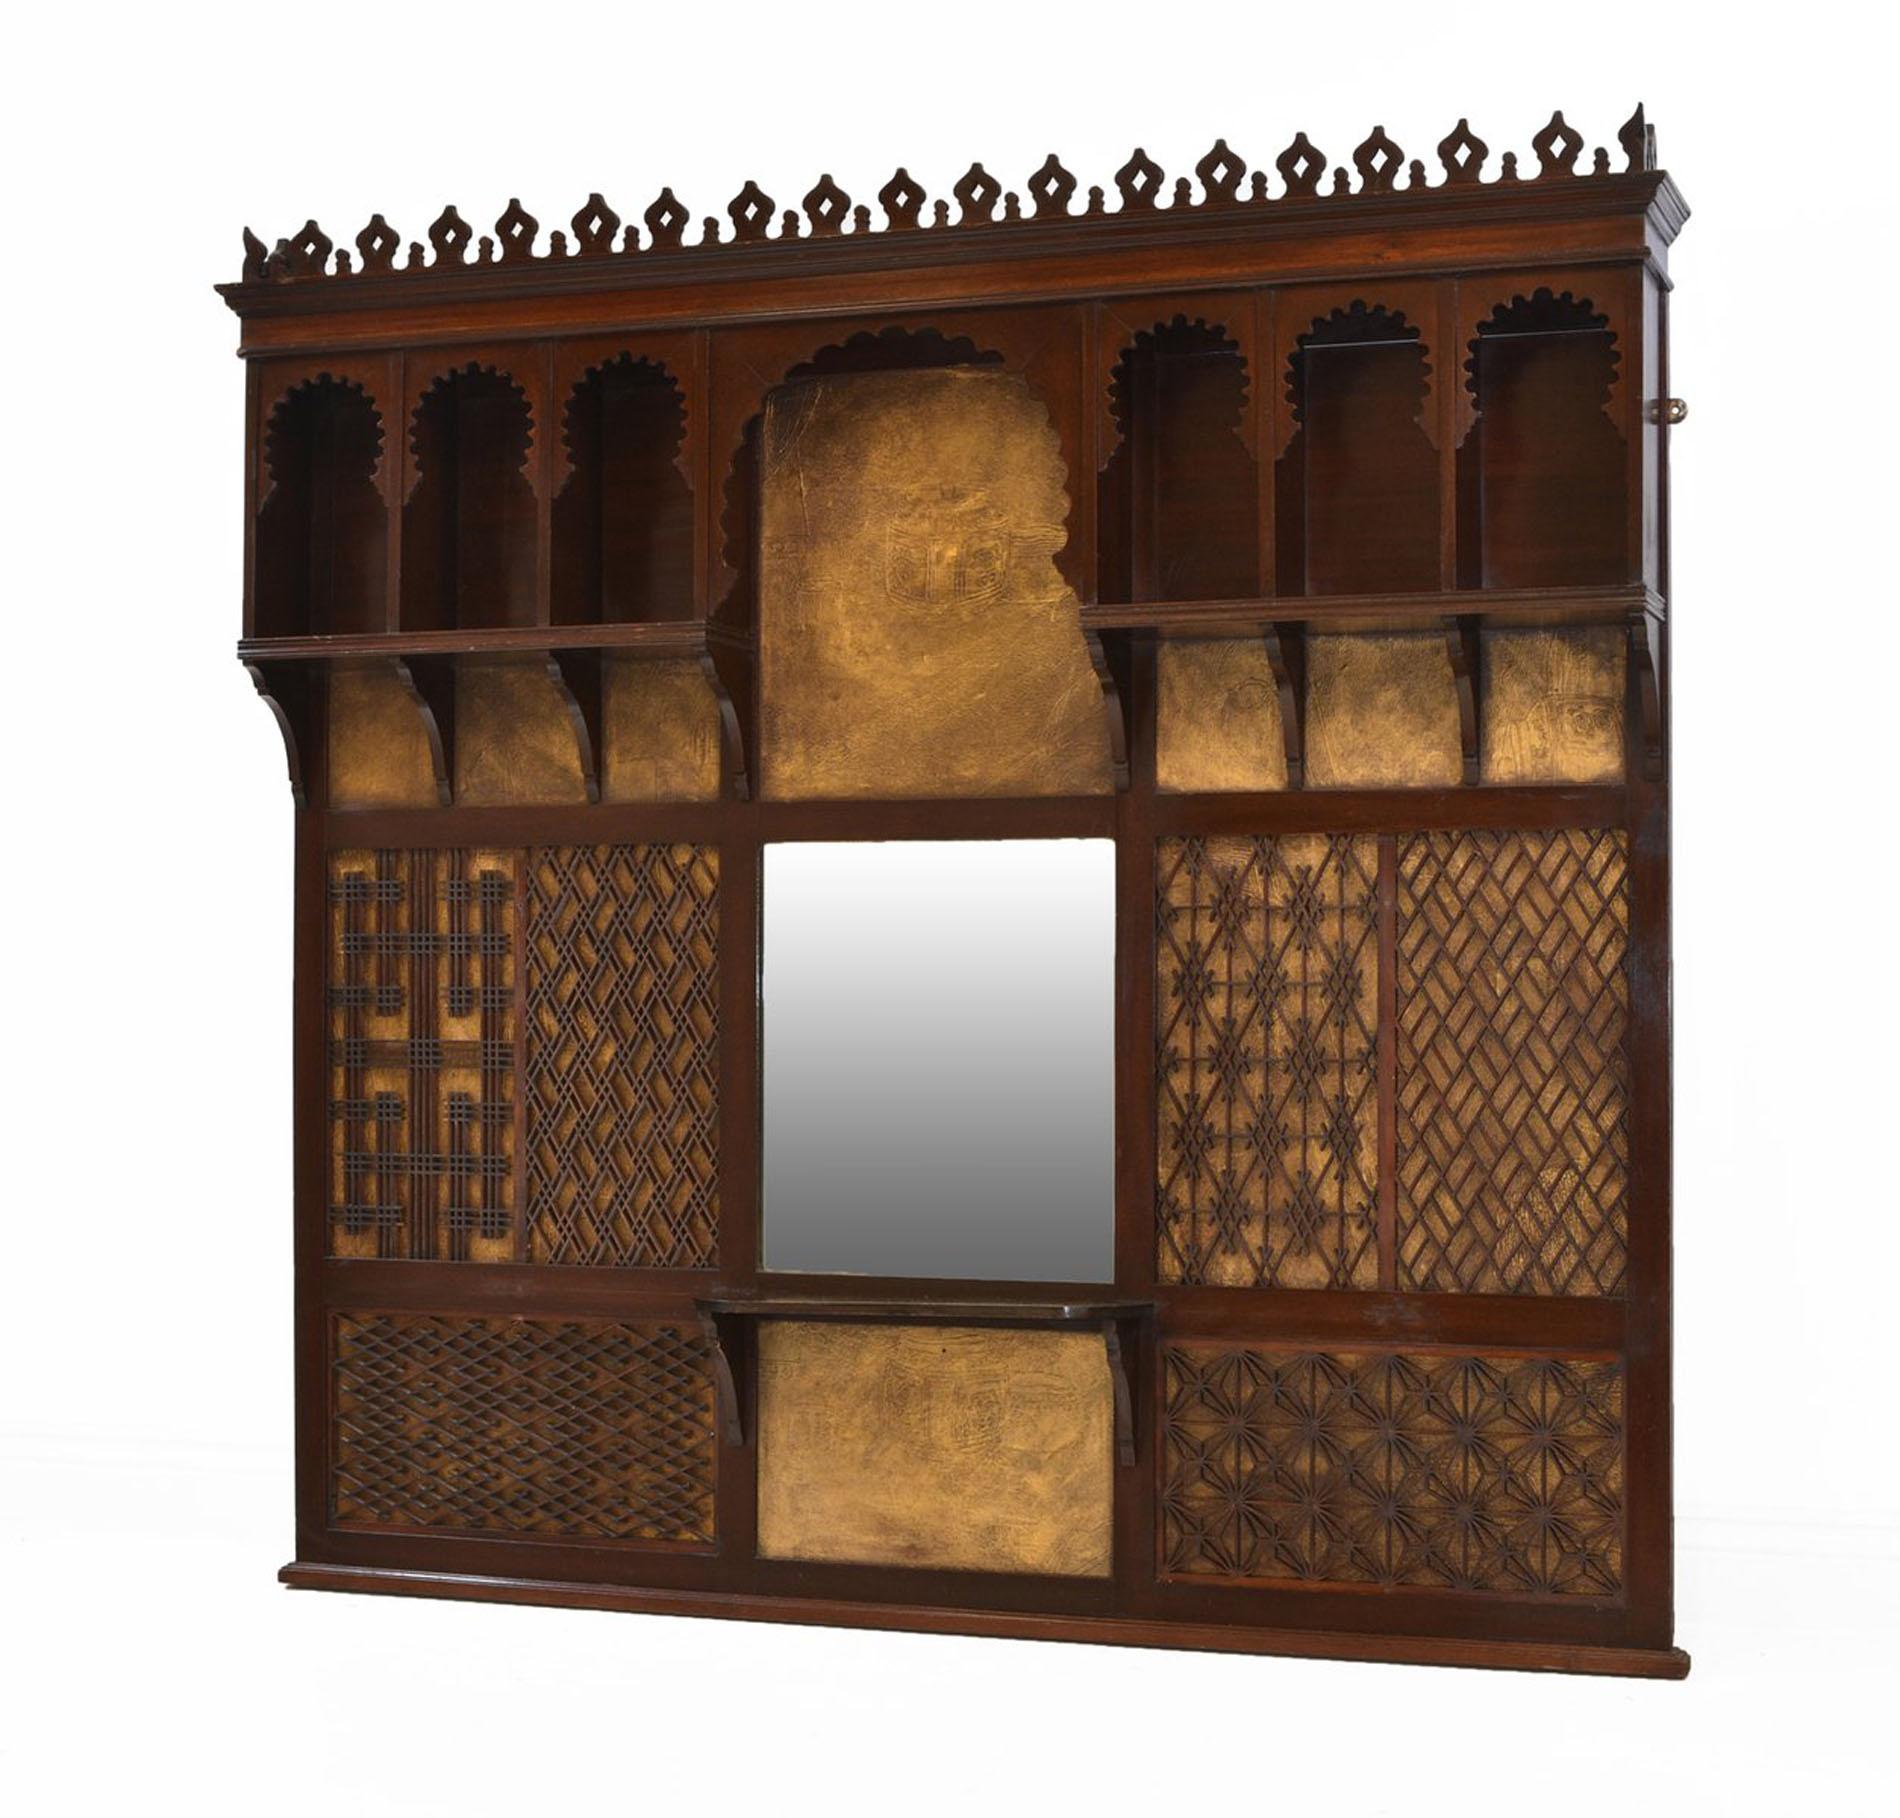 An Aesthetic Movement stained beechwood large overmantle mirror. Circa 1880.

Attributed to Liberty & Co, the mirror has decorative impressed gold colored panels depicting Chinese vases, with over layered various design fret work panels. Above, it